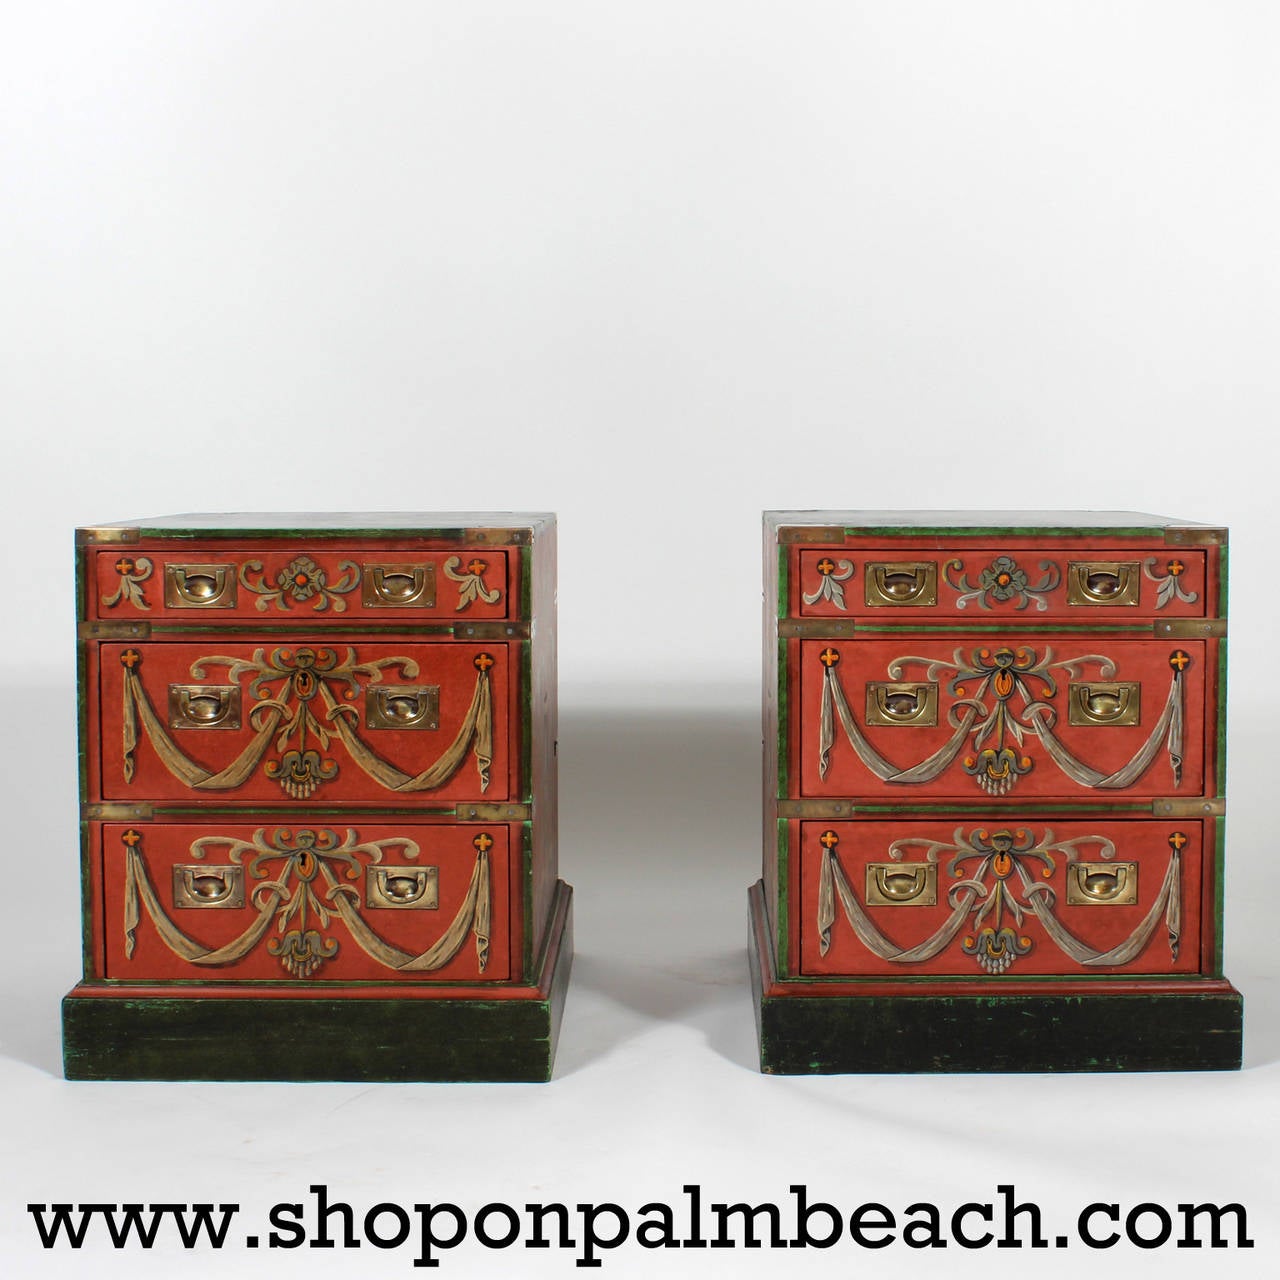 An amazing pair of trompe l'oeil decorated three-drawer Campaign nightstands or end tables, painted on three sides with a floral and drapery motif on a regal red background, with ebonized tops and bases, block feet and Campaign hardware. Campaign in